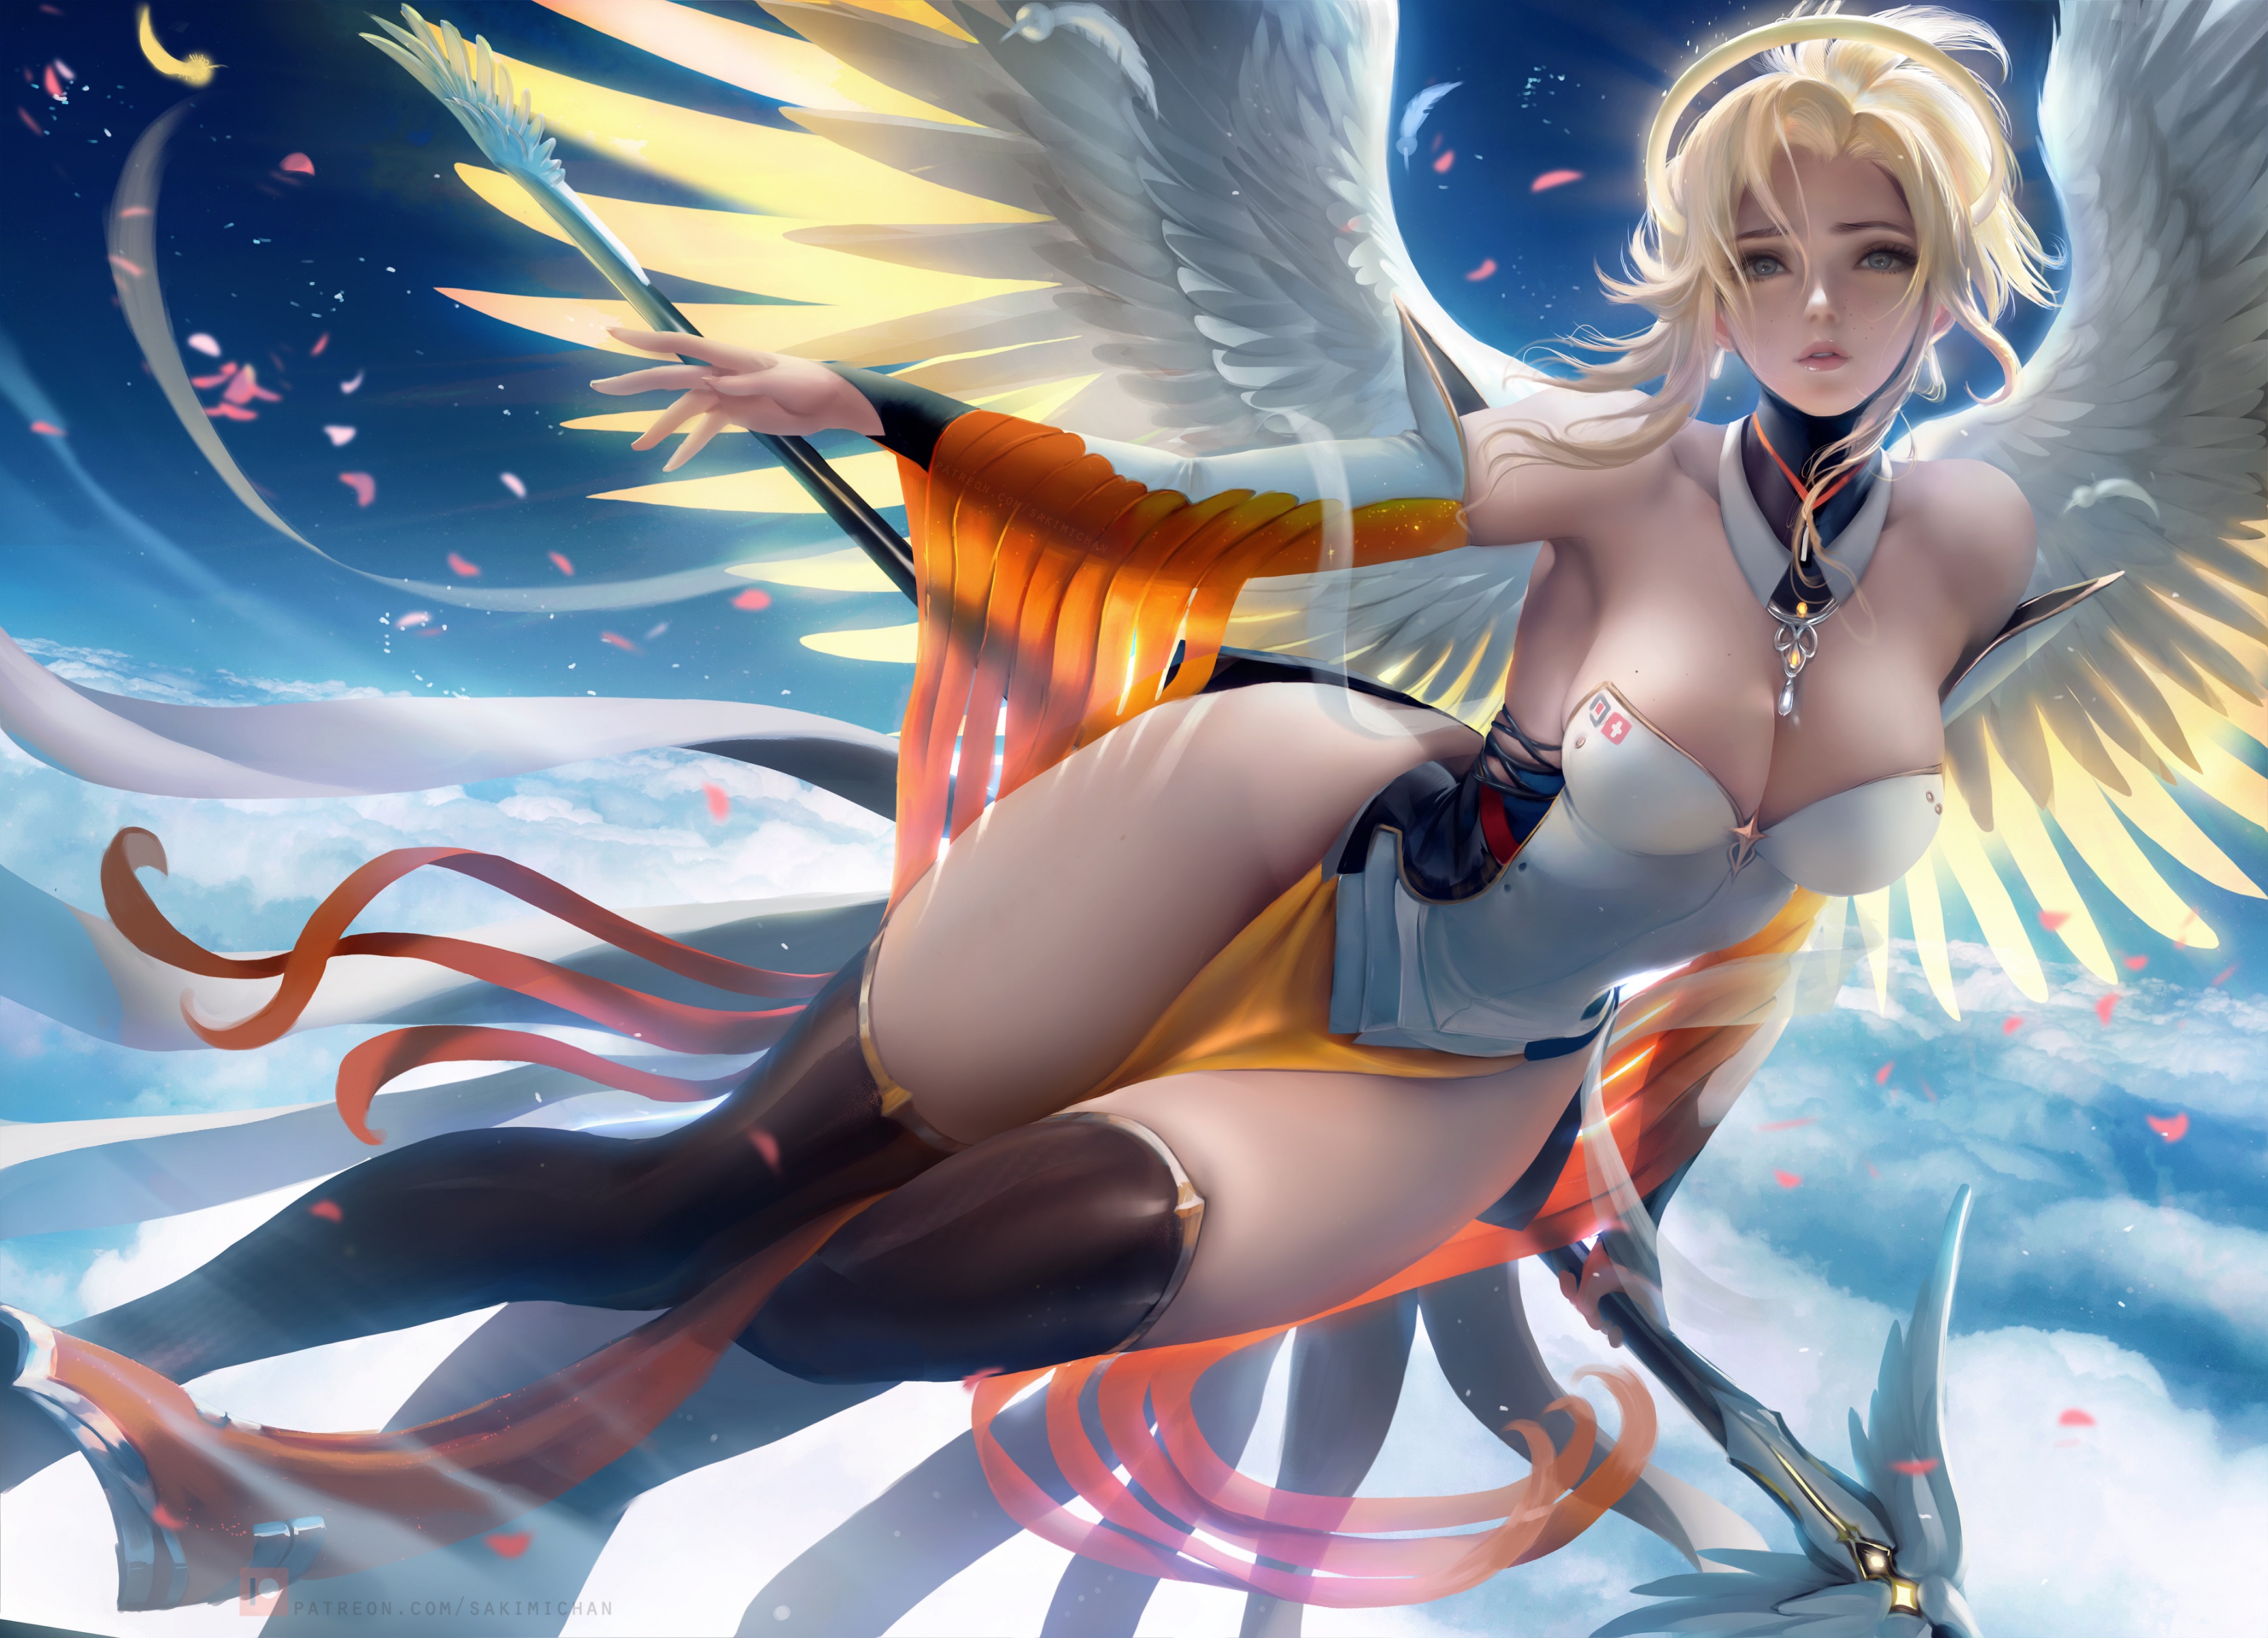 General 3477x2511 cleavage boobs tight clothing corset thighs blonde PC gaming ArtStation curvy big boobs fantasy art fantasy girl stockings Overwatch Mercy (Overwatch) sky video game characters video game girls clouds video games Sakimichan black stockings flying looking at viewer